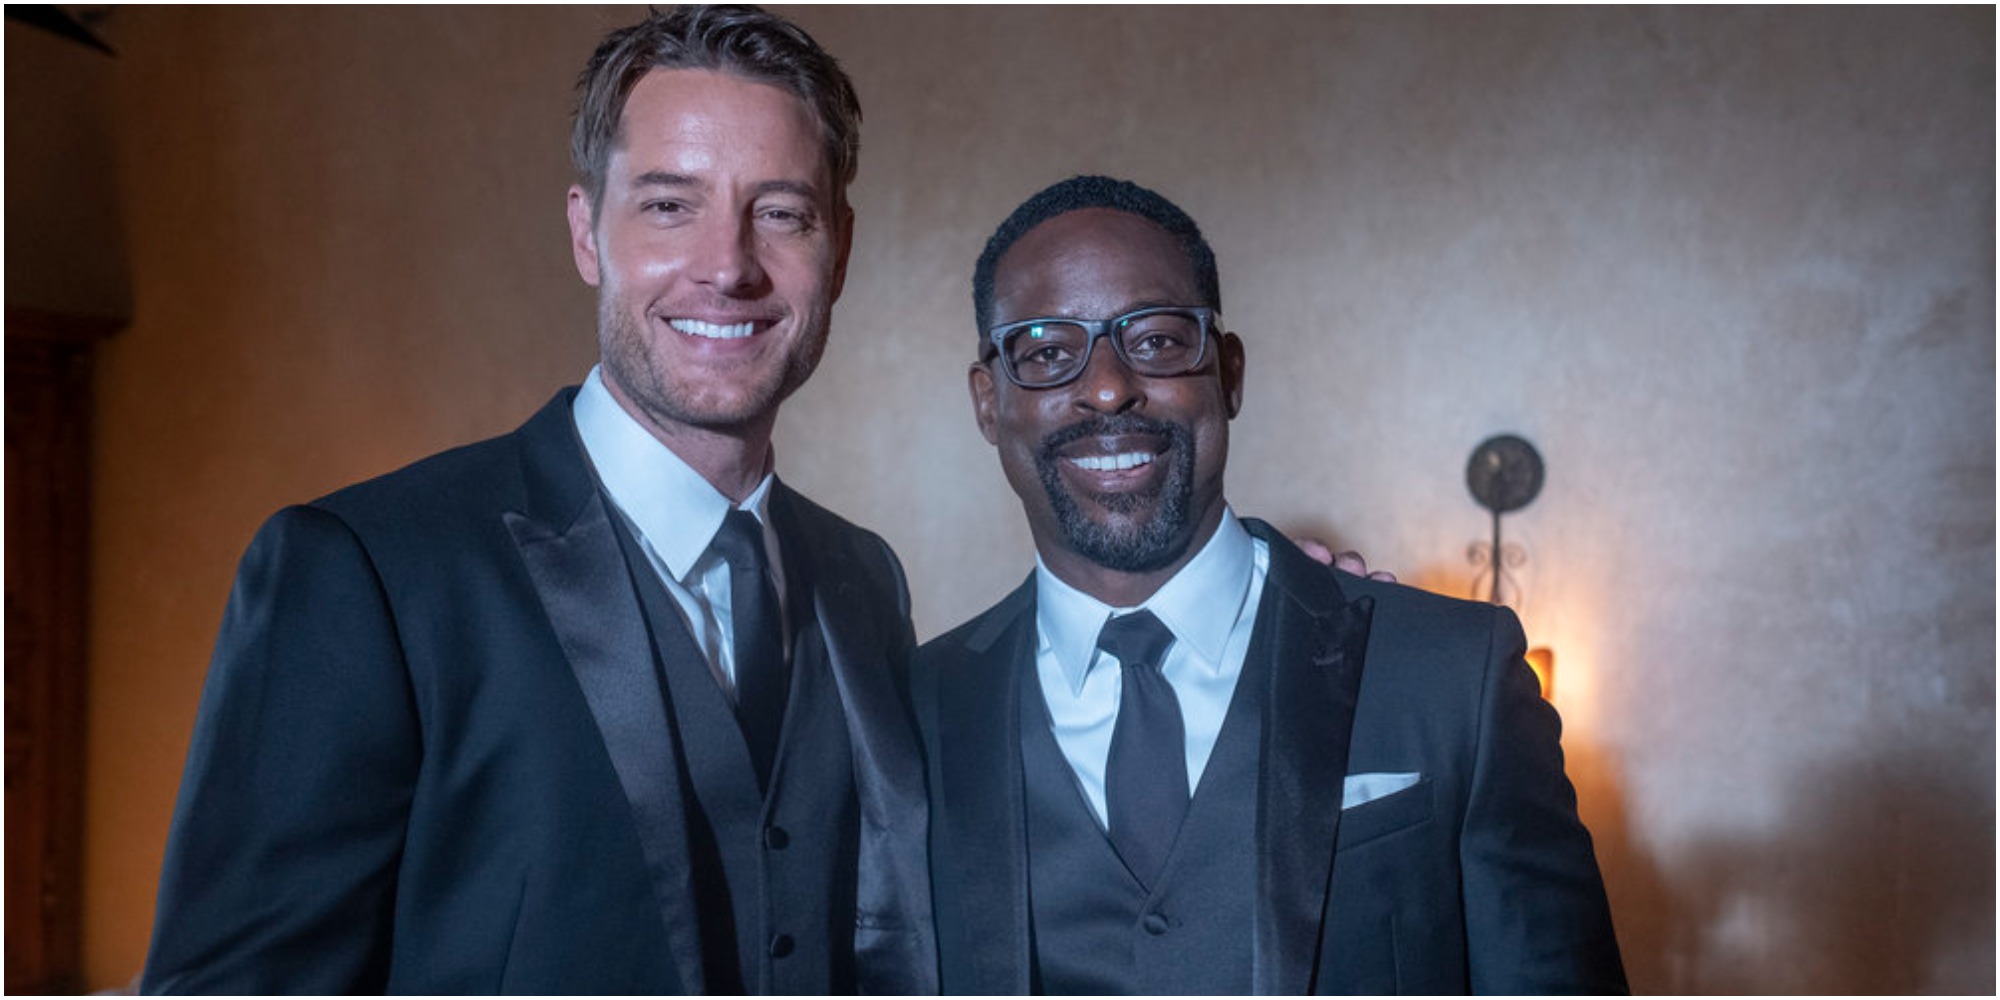 Justin Hartley and Sterling K. Brown star on This Is Us.